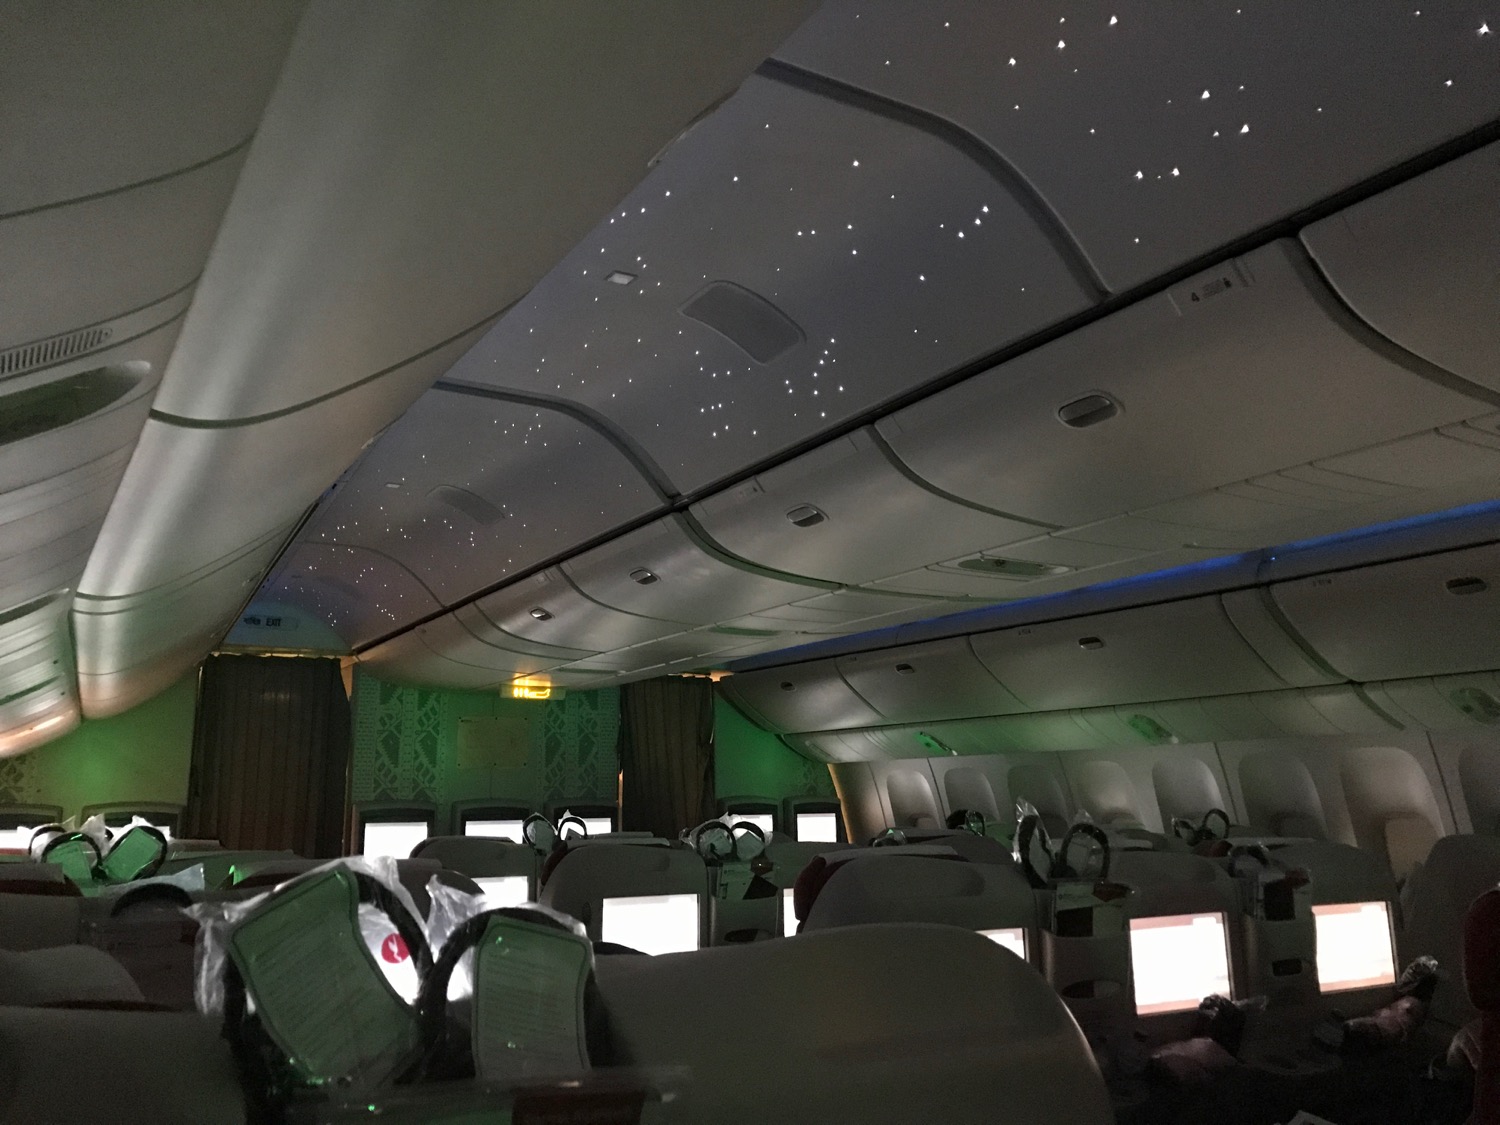 inside an airplane with lights on